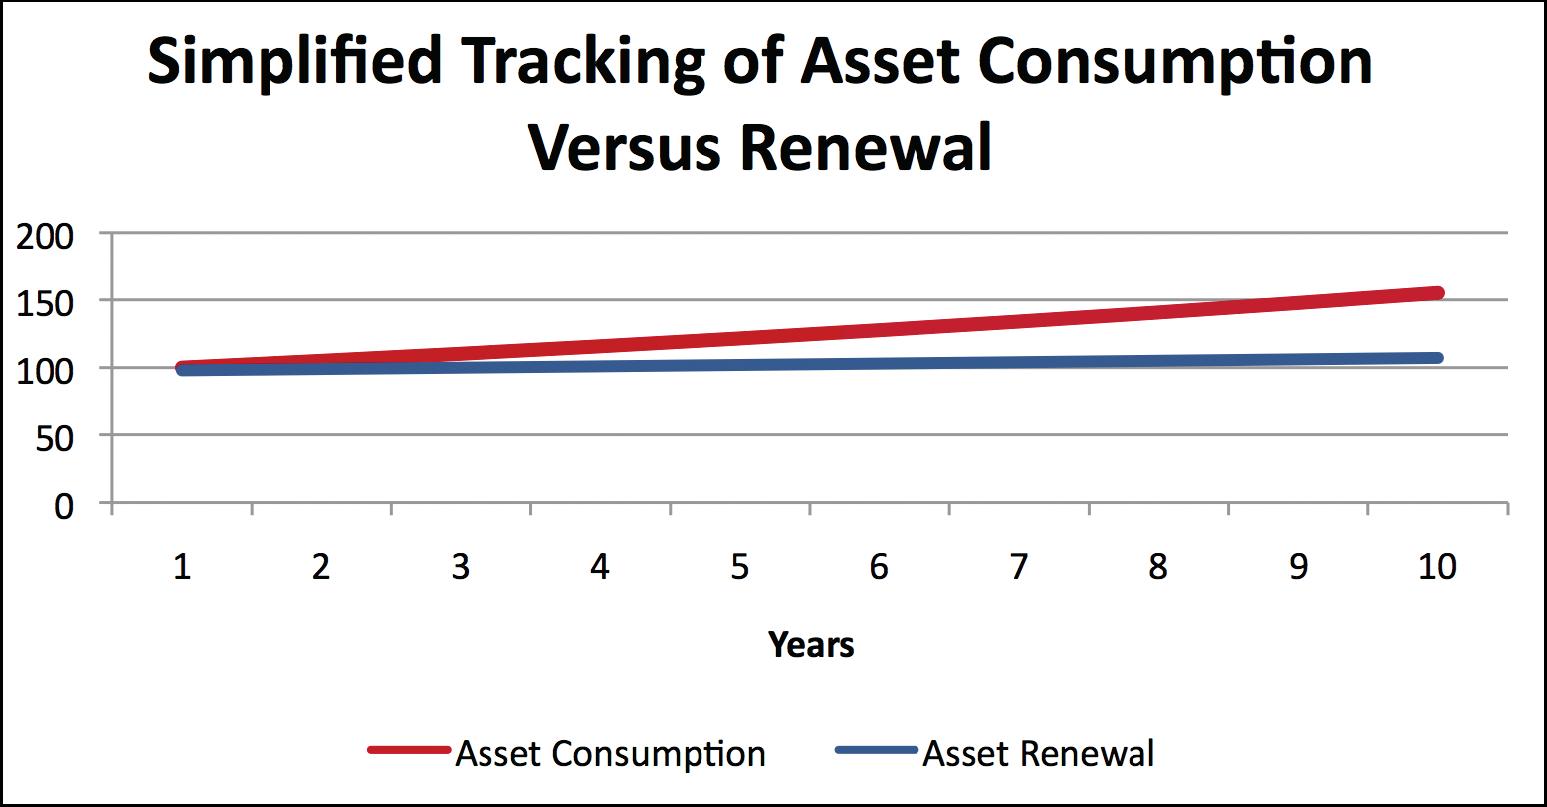 Figure 16 is a simplified illustration comparing a theoretical example of  the amount spent on asset renewal over 10 years compared to the value of assets consumed over the same 10 years. The two trendlines illustrate that asset consumption increases over the 10 years by nearly 50 percent, outpacing the asset renewals that barely increase over the same period. 